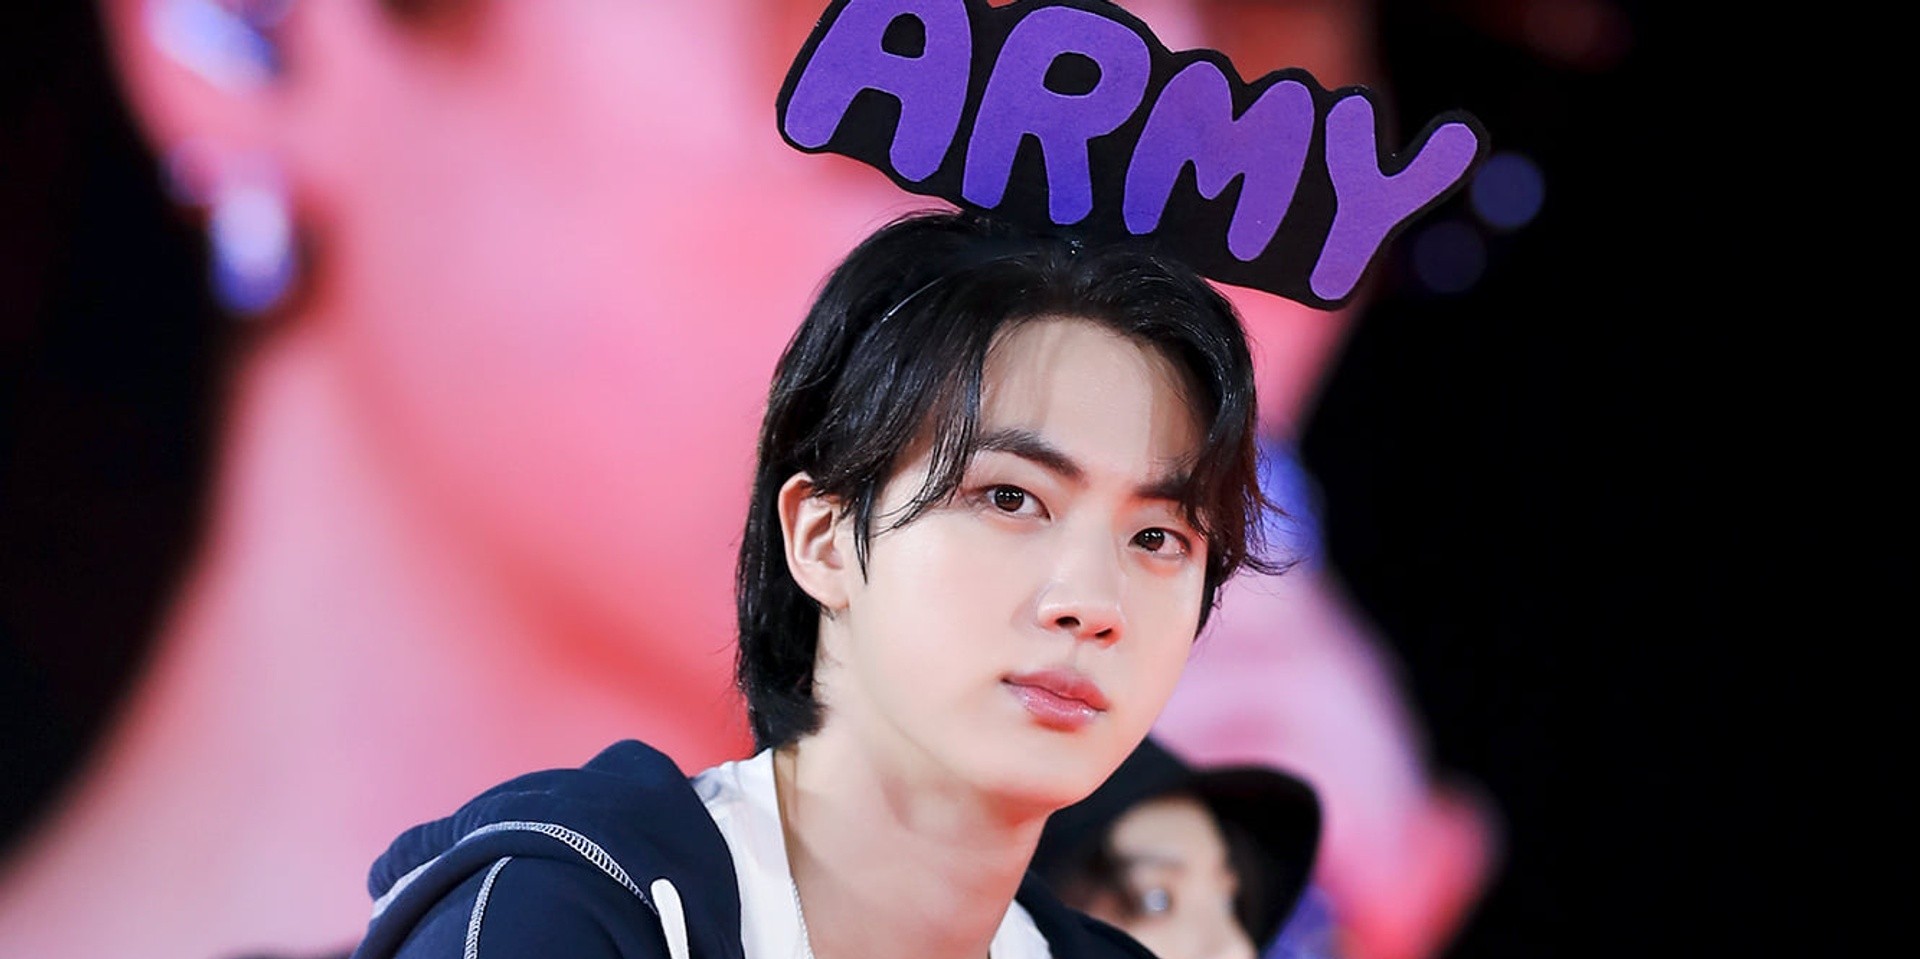 BTS' Jin to ARMY: "You are my, and BTS' living PROOF.'